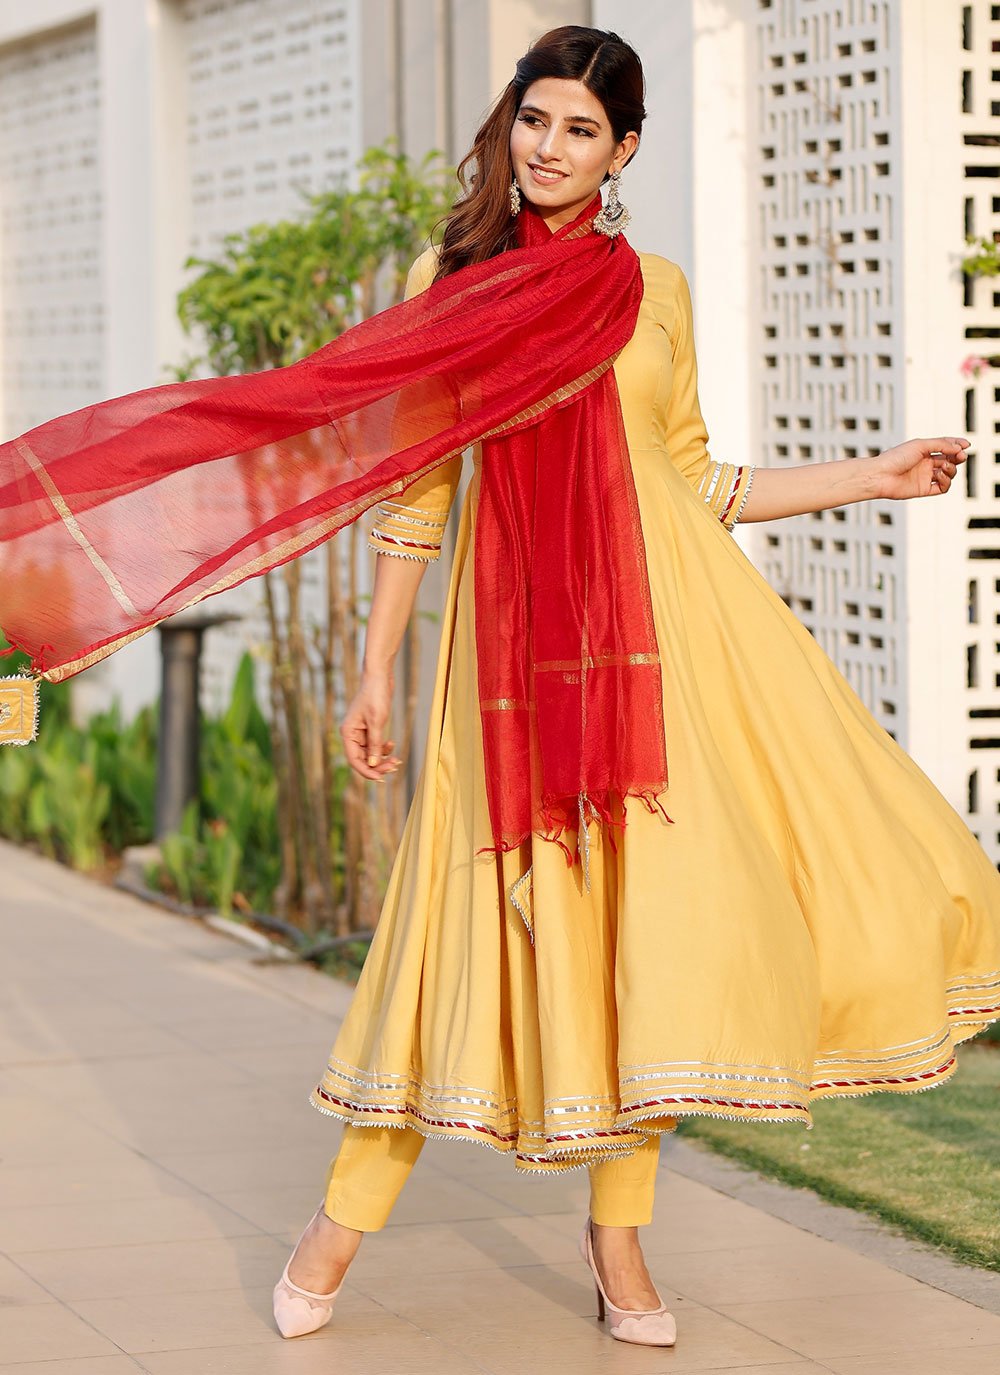 Bunaai - The combination of red and yellow is always refreshing to the  eyes. The gorgeous red dupatta adds to its perfection which makes the suit  even more appealing. Grab it now